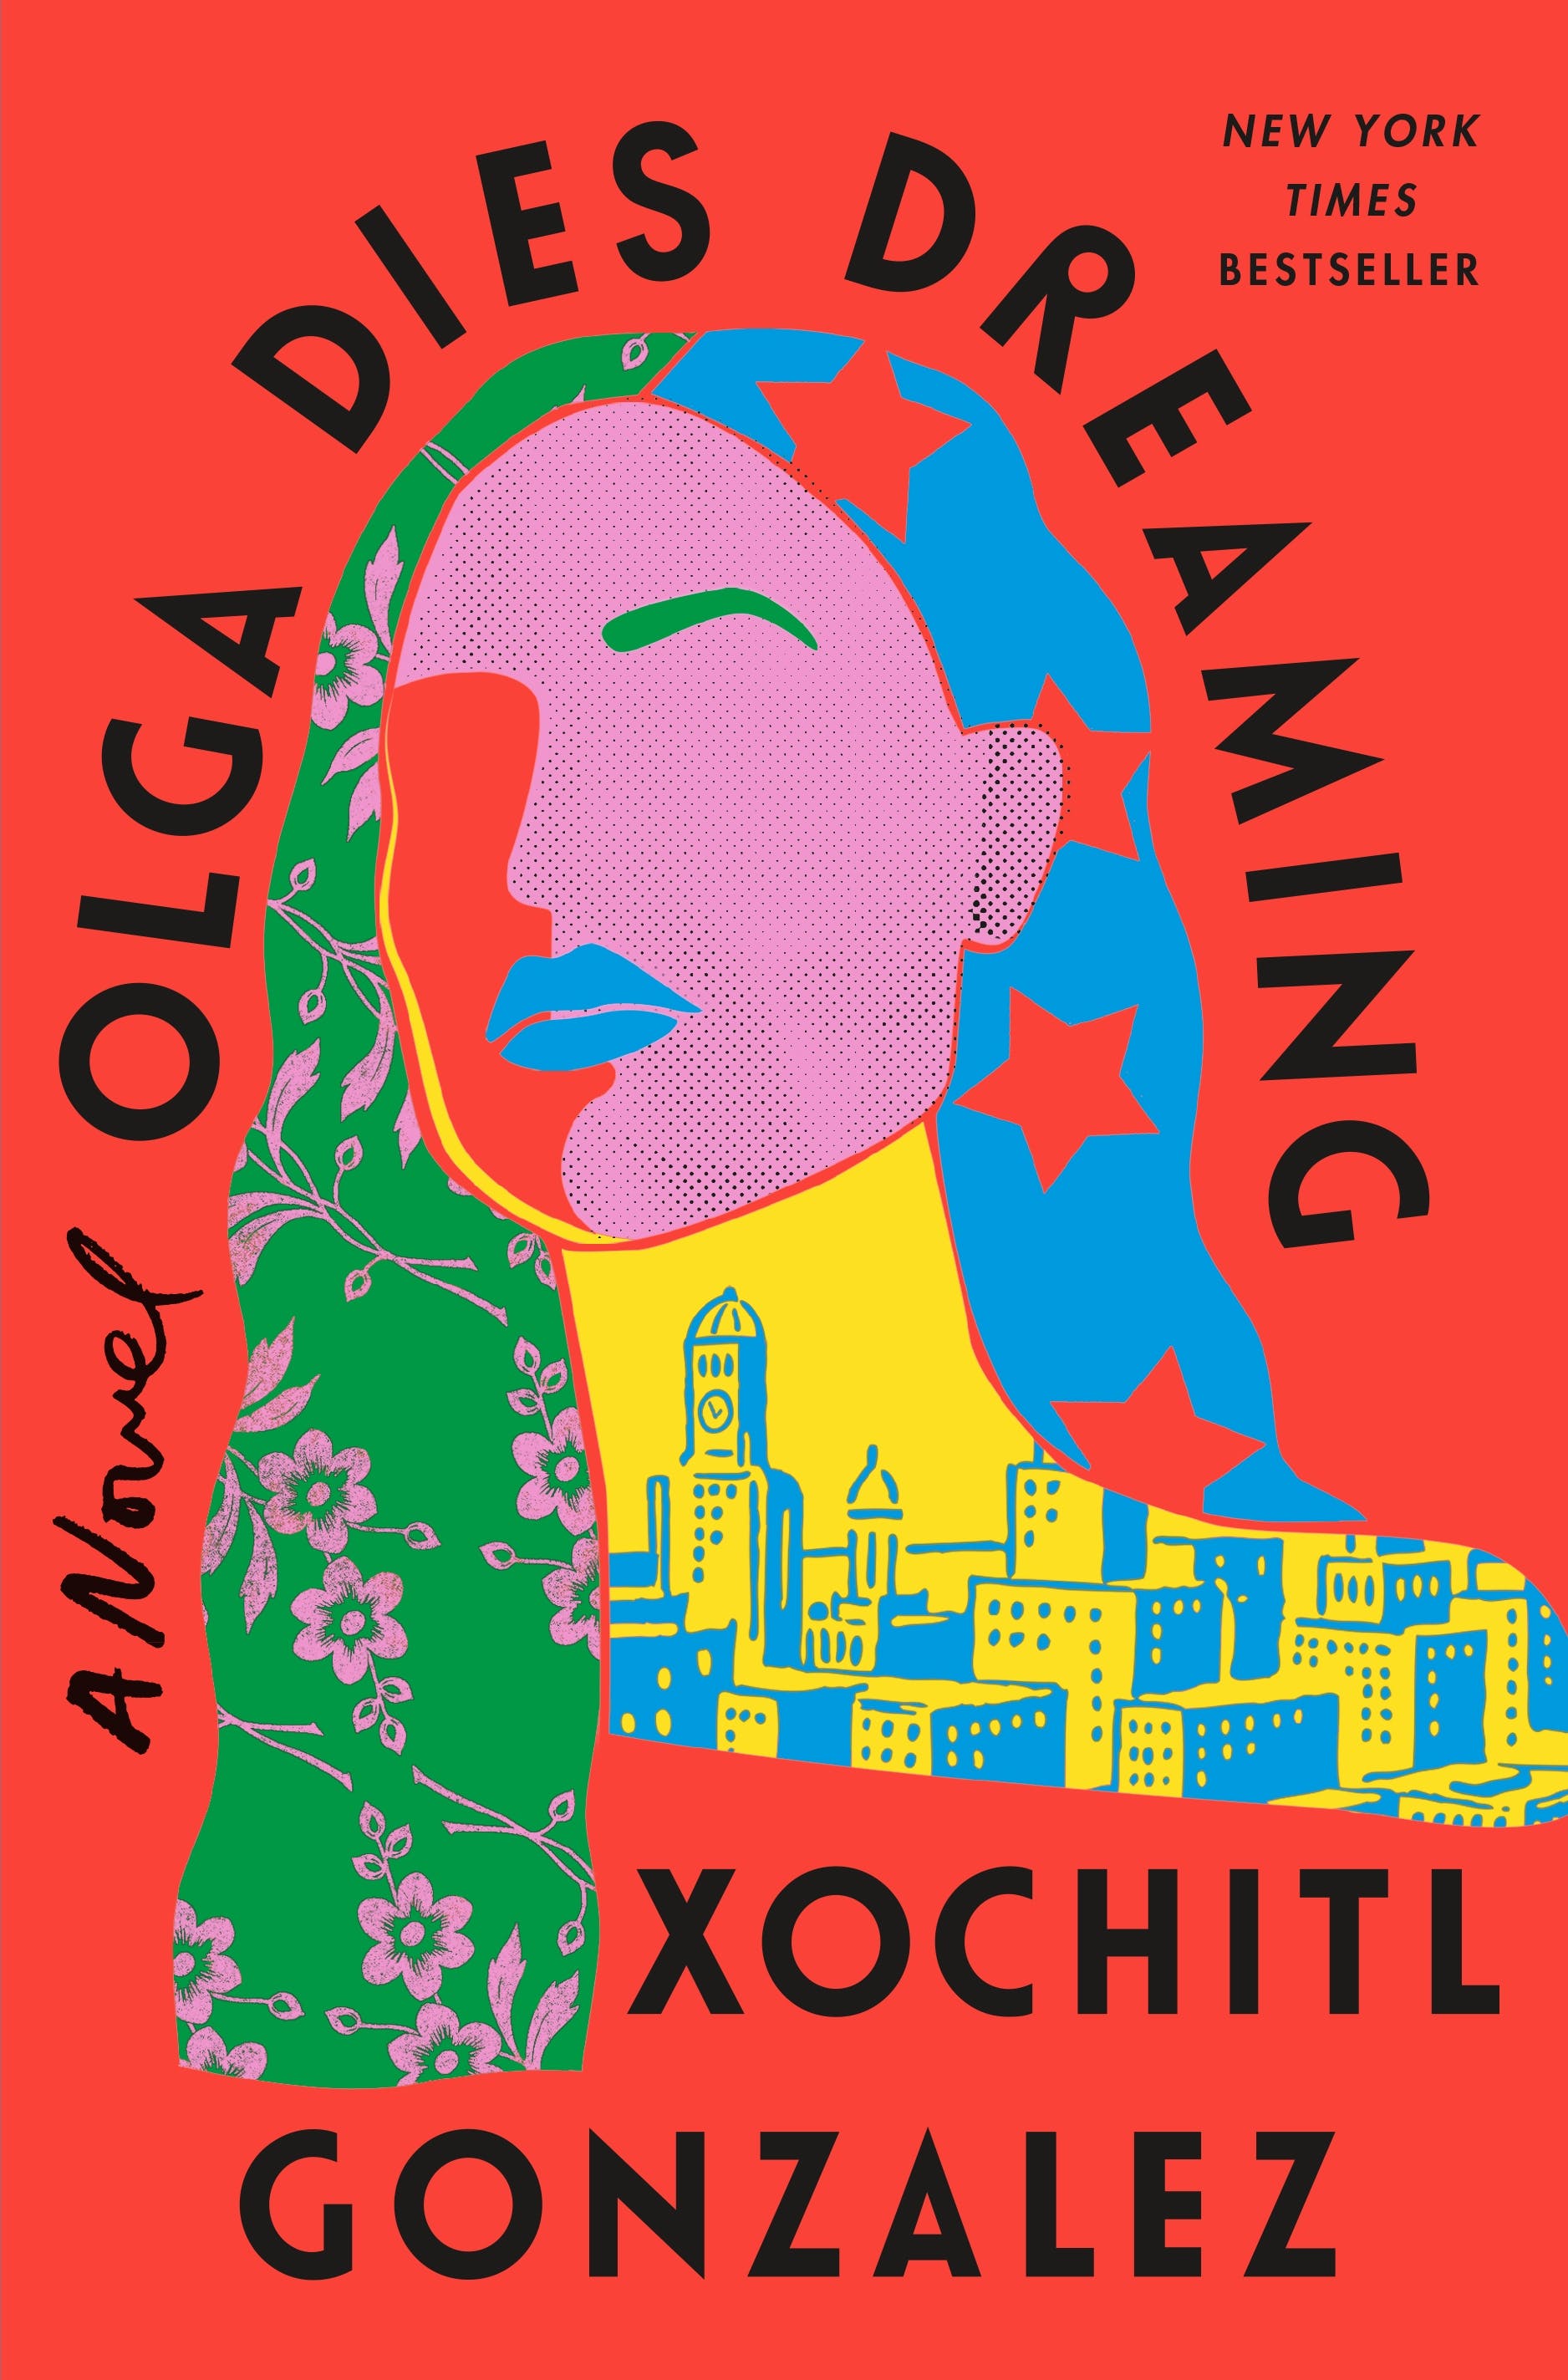 The cover of Olga Dies Dreaming by Xochitl Gonzalez, featuring a woman's face made up of bold blocks of color on top of a cityscape